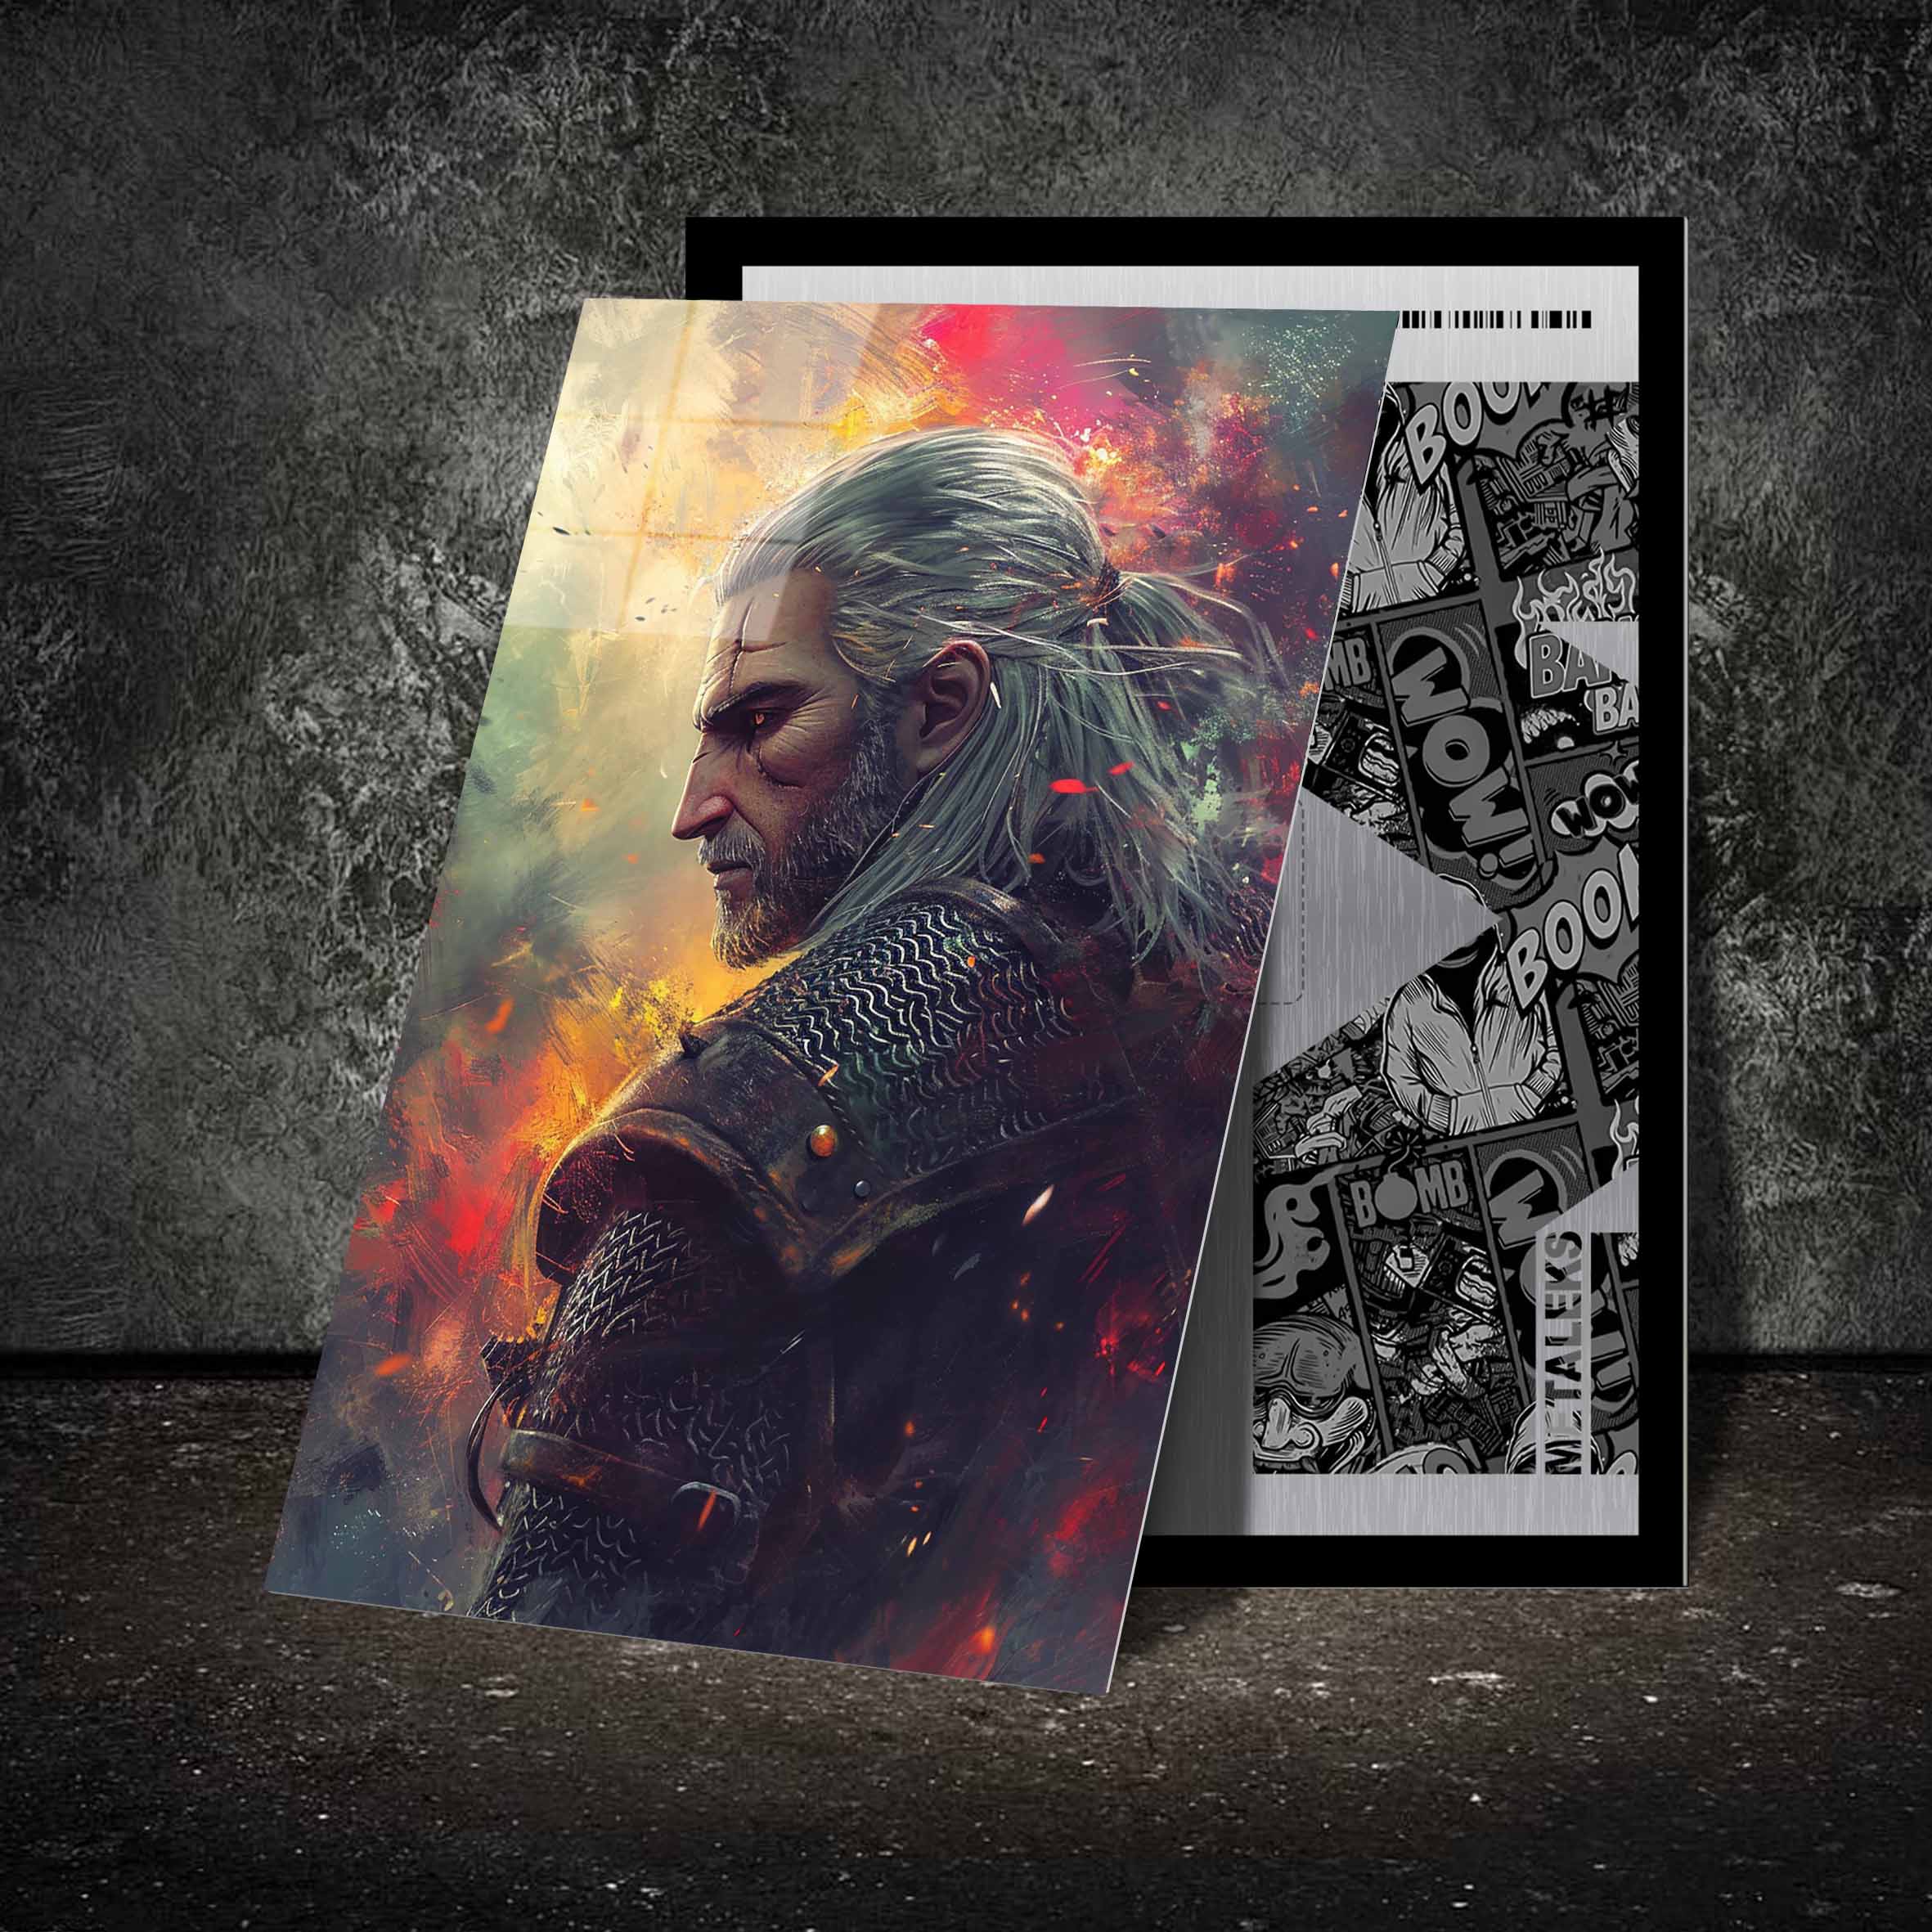 Geralt of Rivia X The Witcher-Artwork by @Pixalaxy